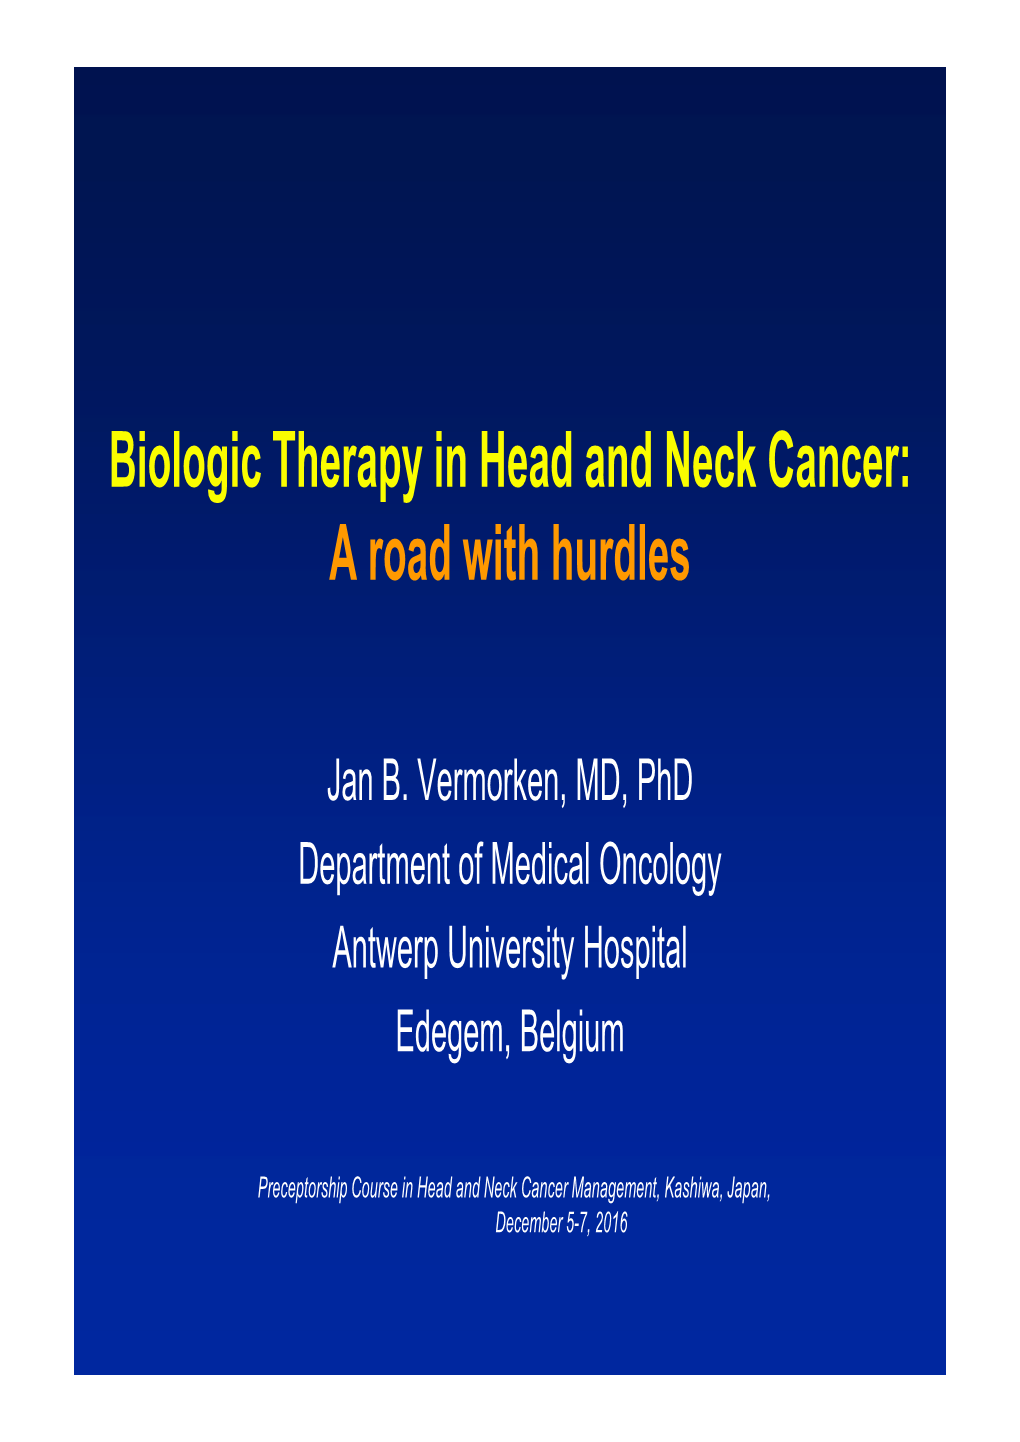 Biologic Therapy in Head and Neck Cancer: a Road with Hurdles